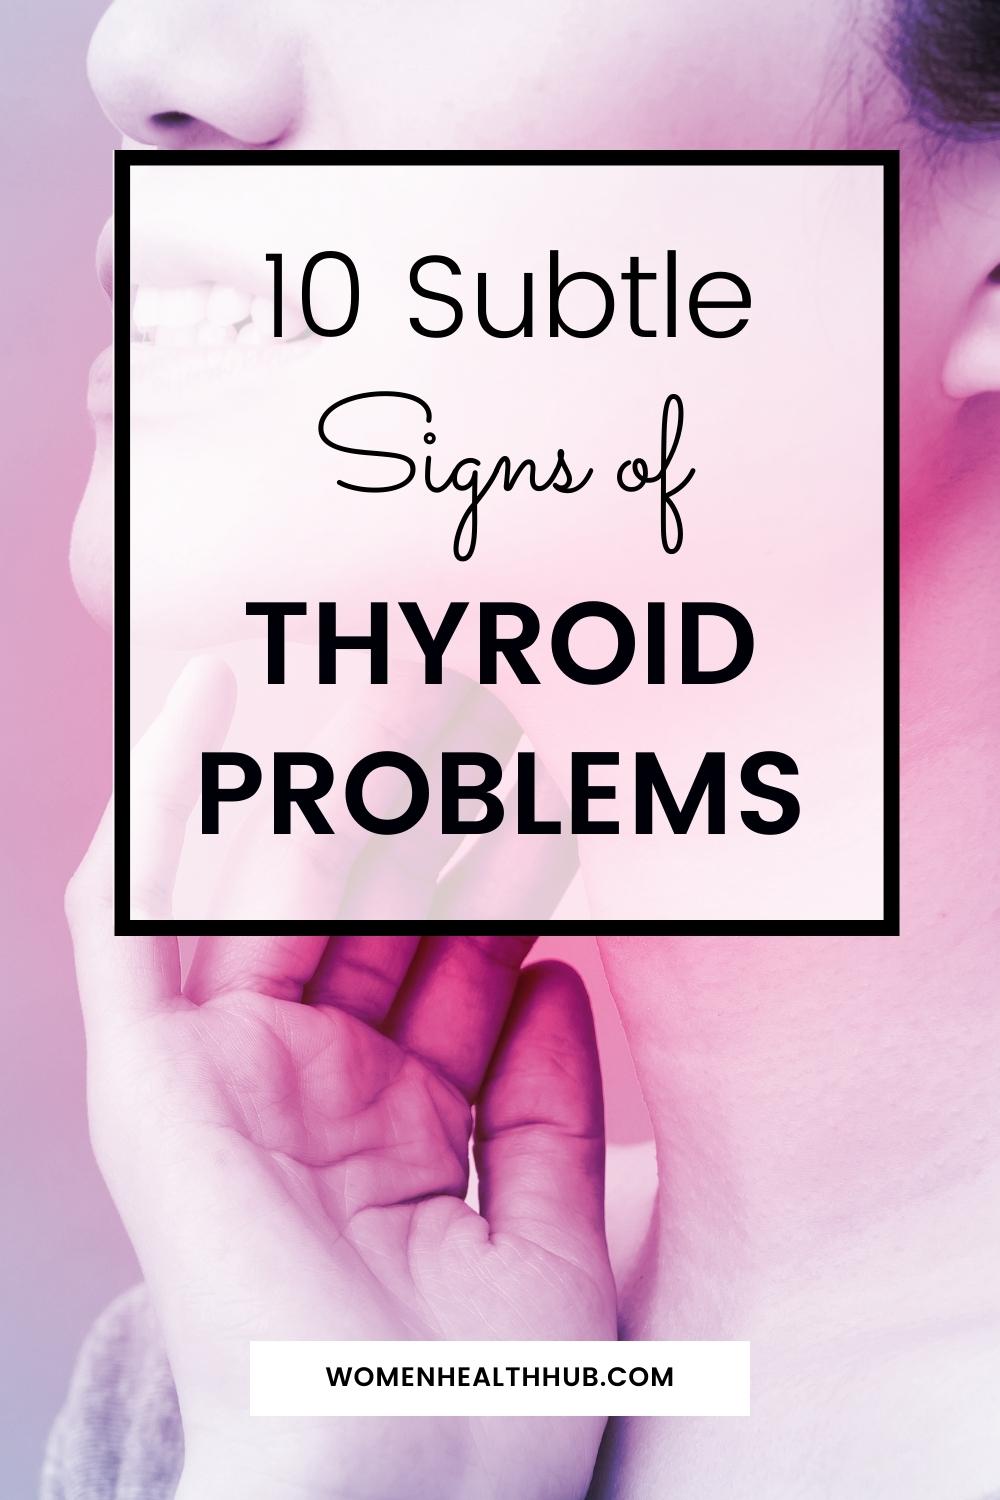 Signs and symptoms of thyroid disorder - Women Health Hub